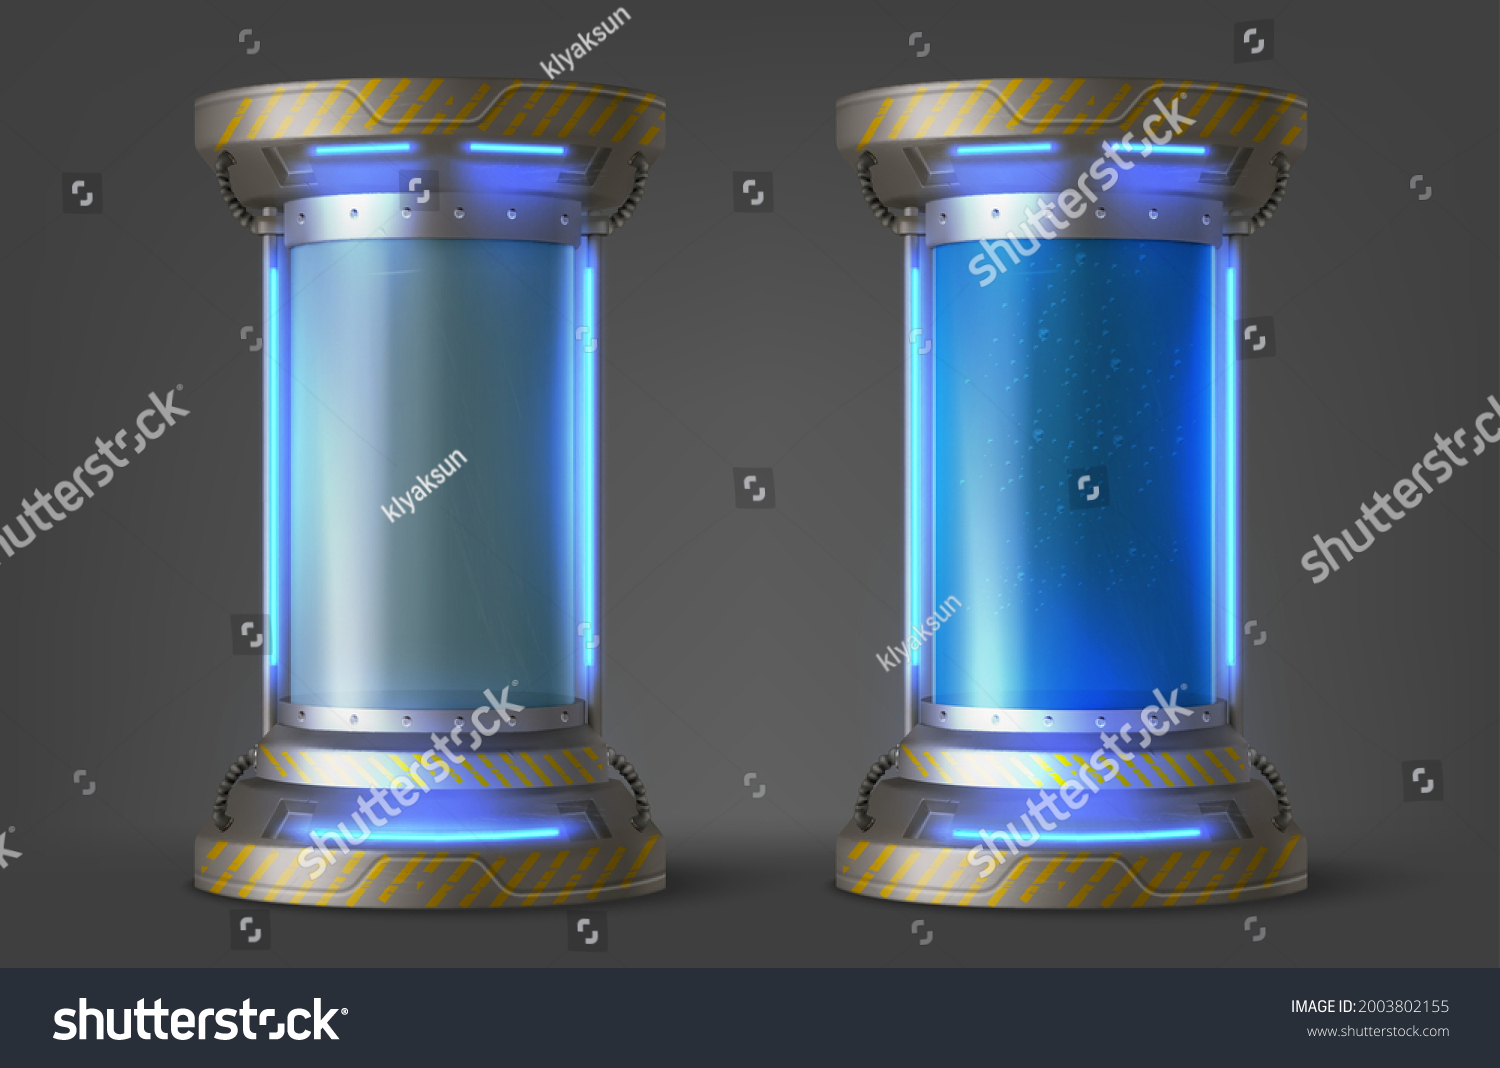 SVG of Cryonics capsules, empty and full futuristic containers, glass tubes with cryogenic liquid for hibernation. Scientific technology camera, Sci-fi laboratory equipment, Realistic 3d vector illustration svg